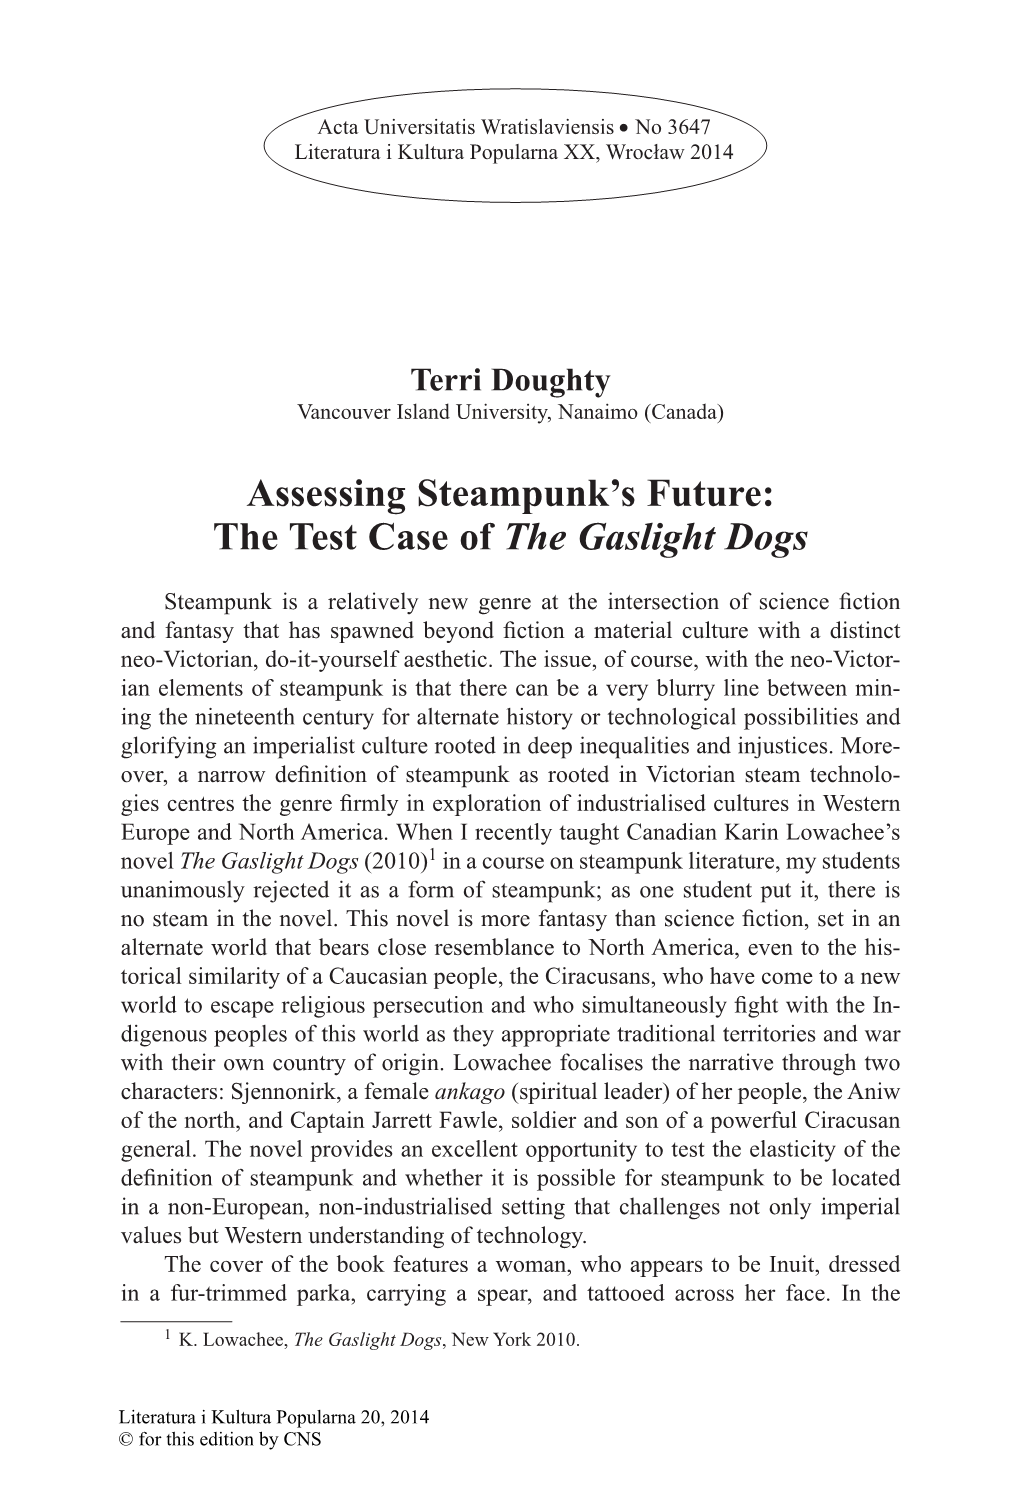 Assessing Steampunk's Future: the Test Case of the Gaslight Dogs